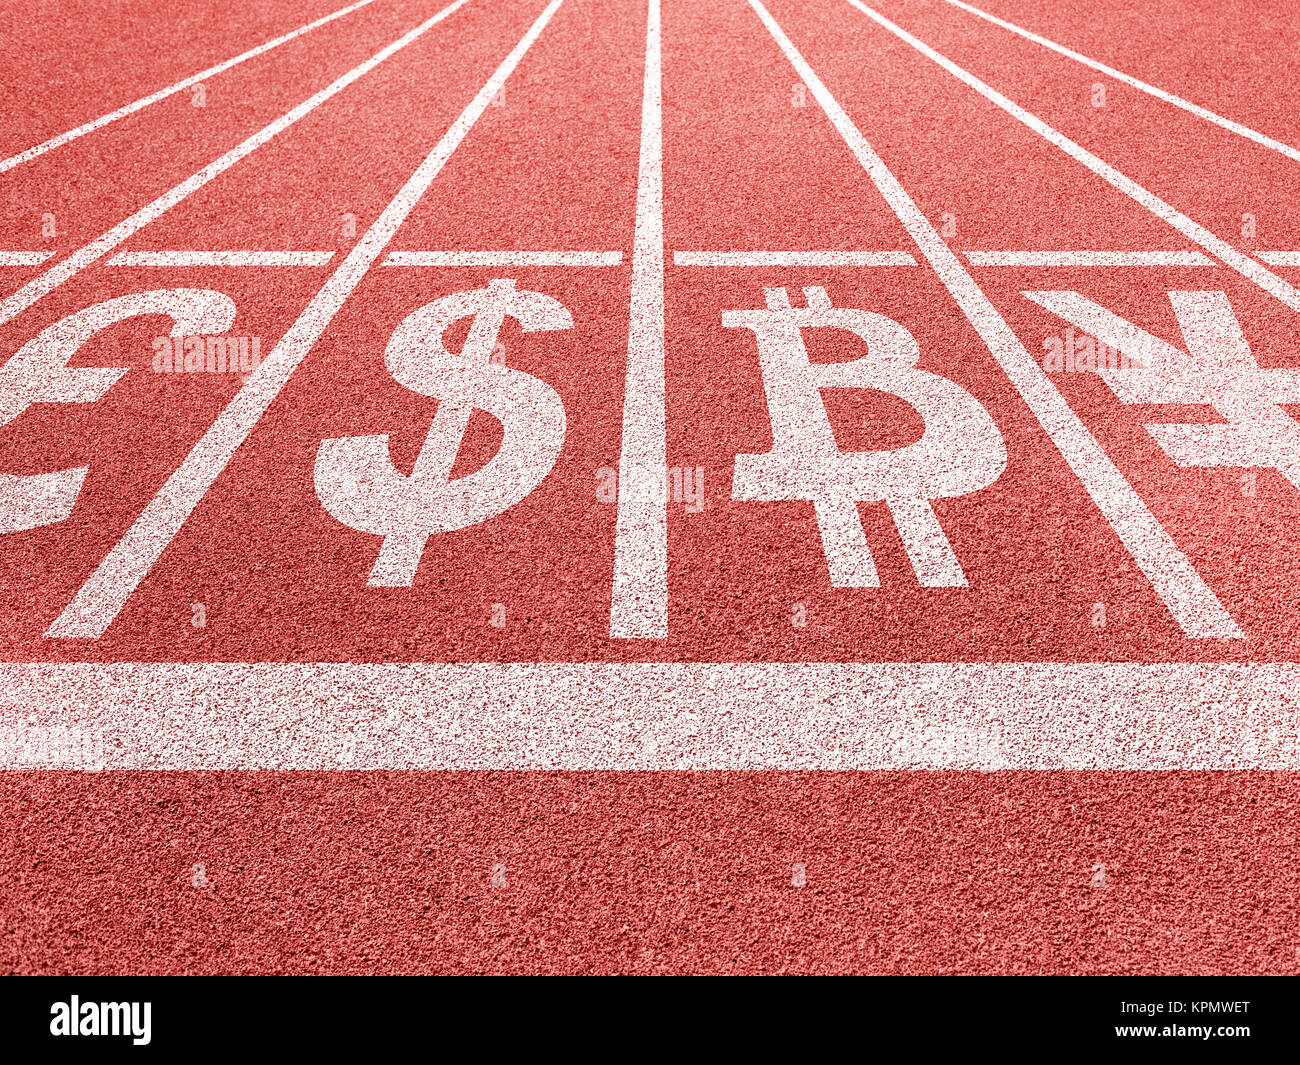 Currencies symbols on running trace start Stock Photo